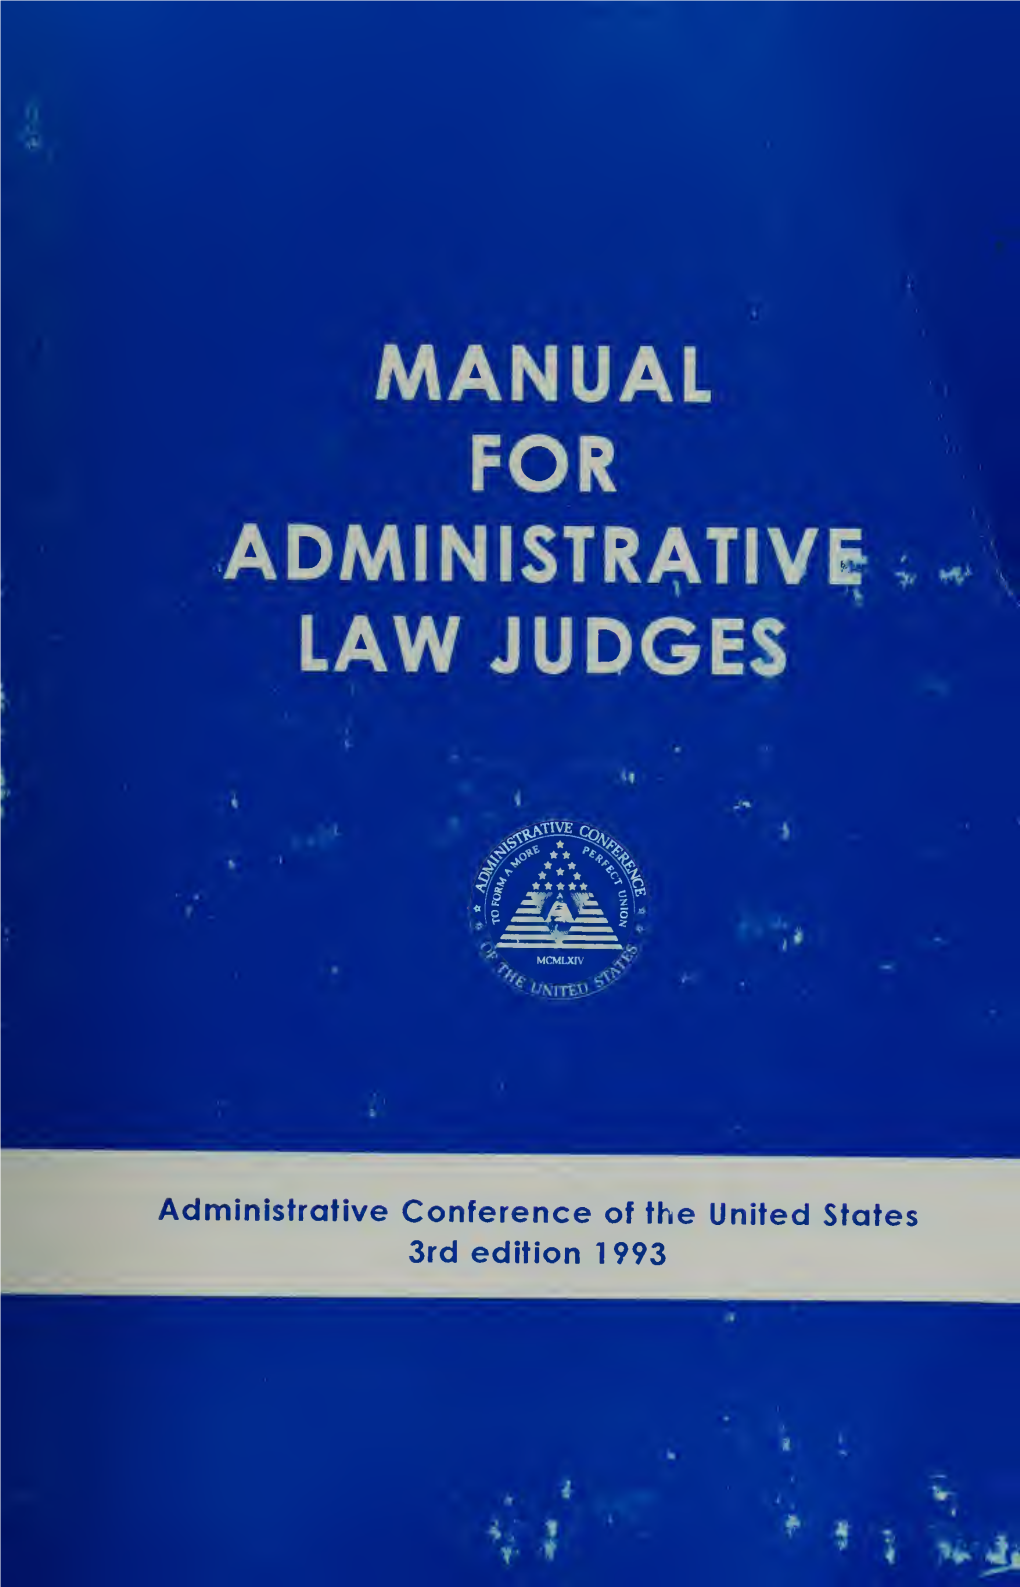 Manual for Administrative Law Judges